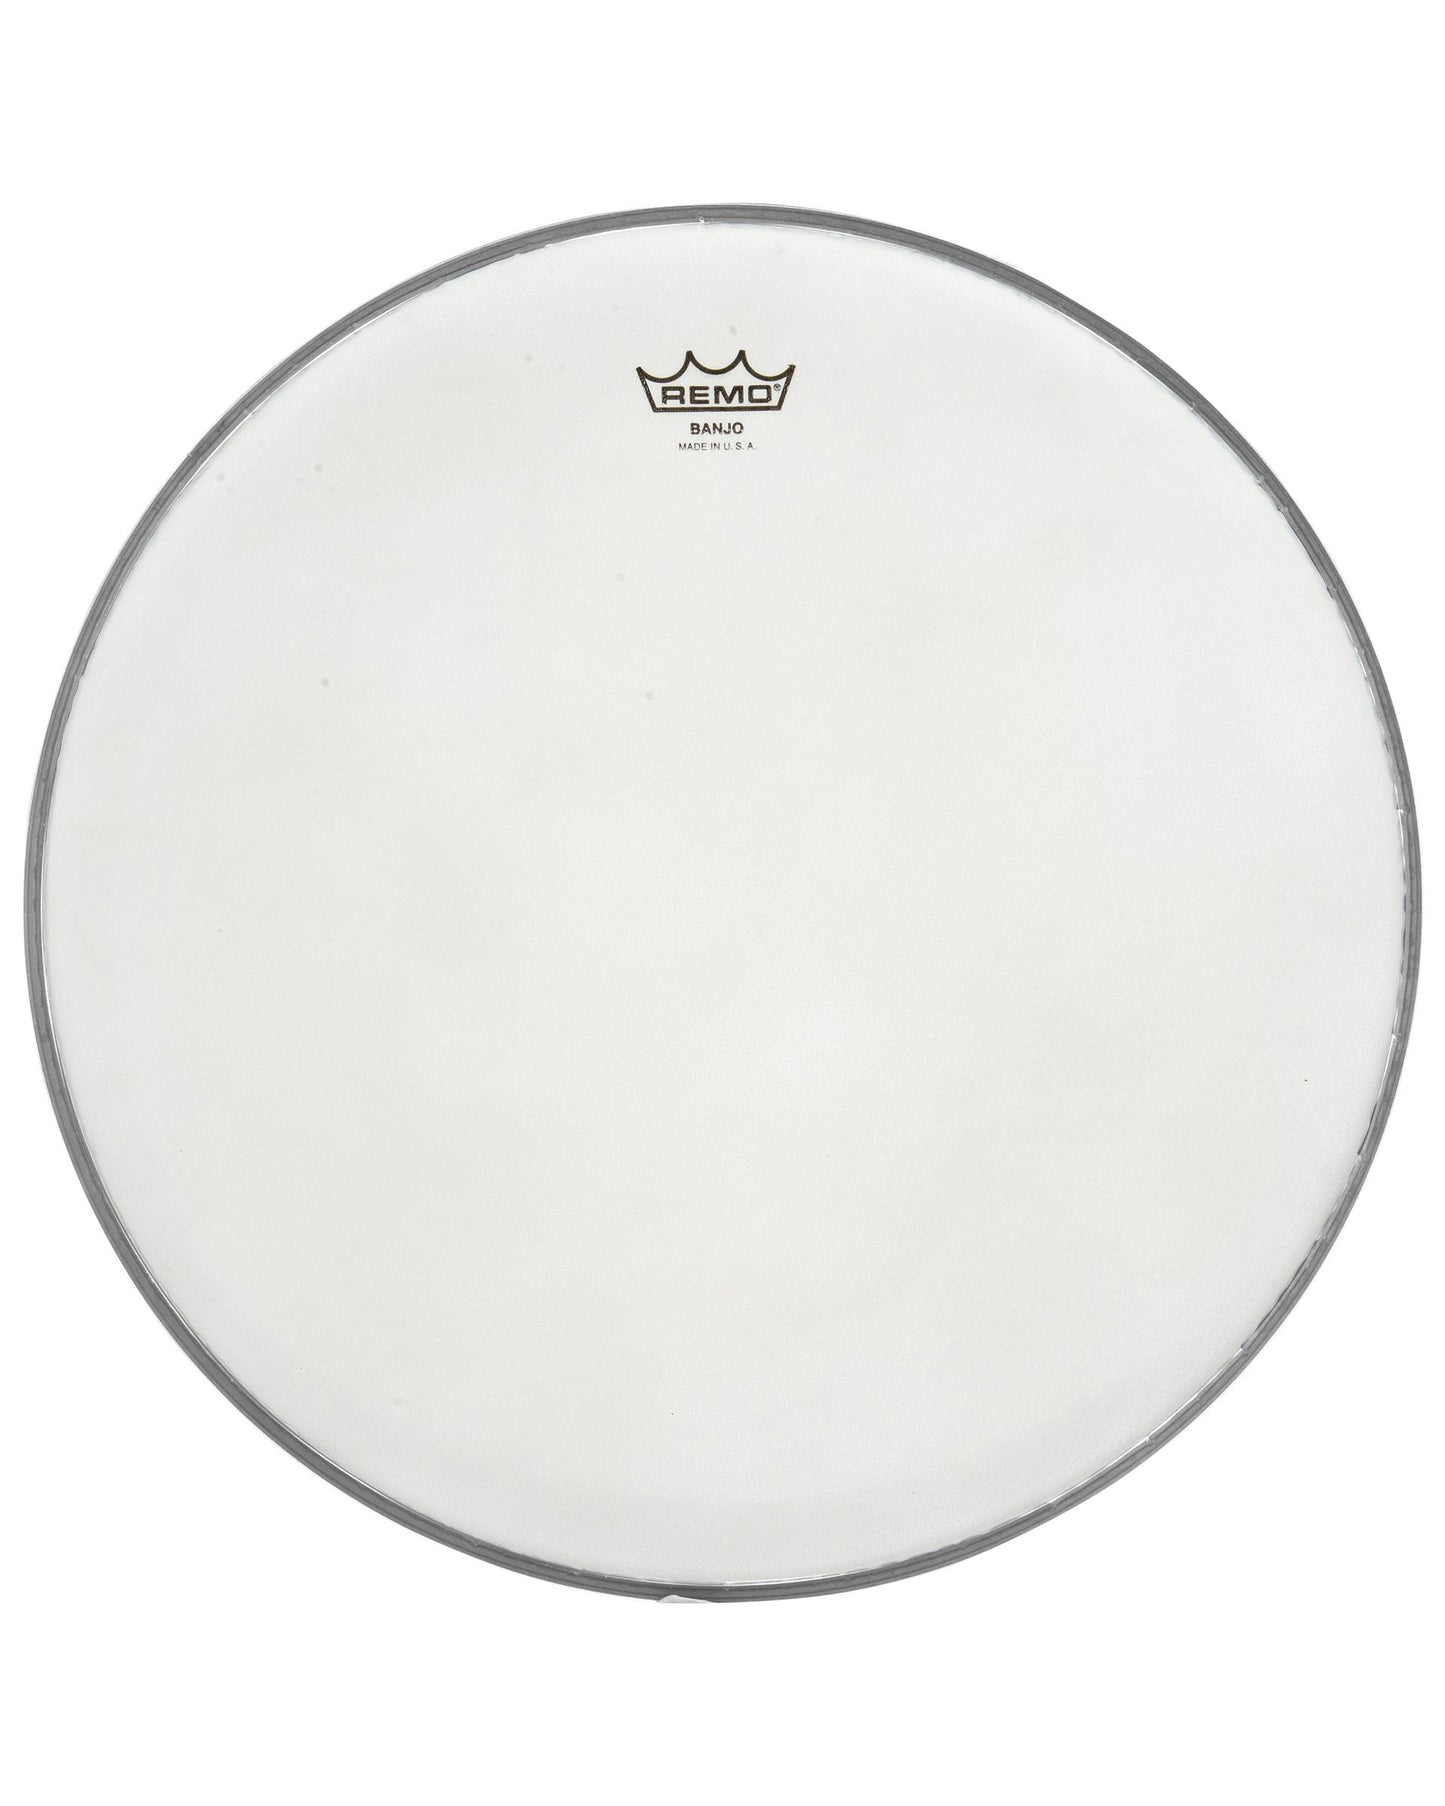 Image 1 of Remo Frosted Bottom Banjo Head, 10 15/16 Inch Diameter, High Crown (1/2 Inch) - SKU# B1015-H-FRB : Product Type Accessories & Parts : Elderly Instruments